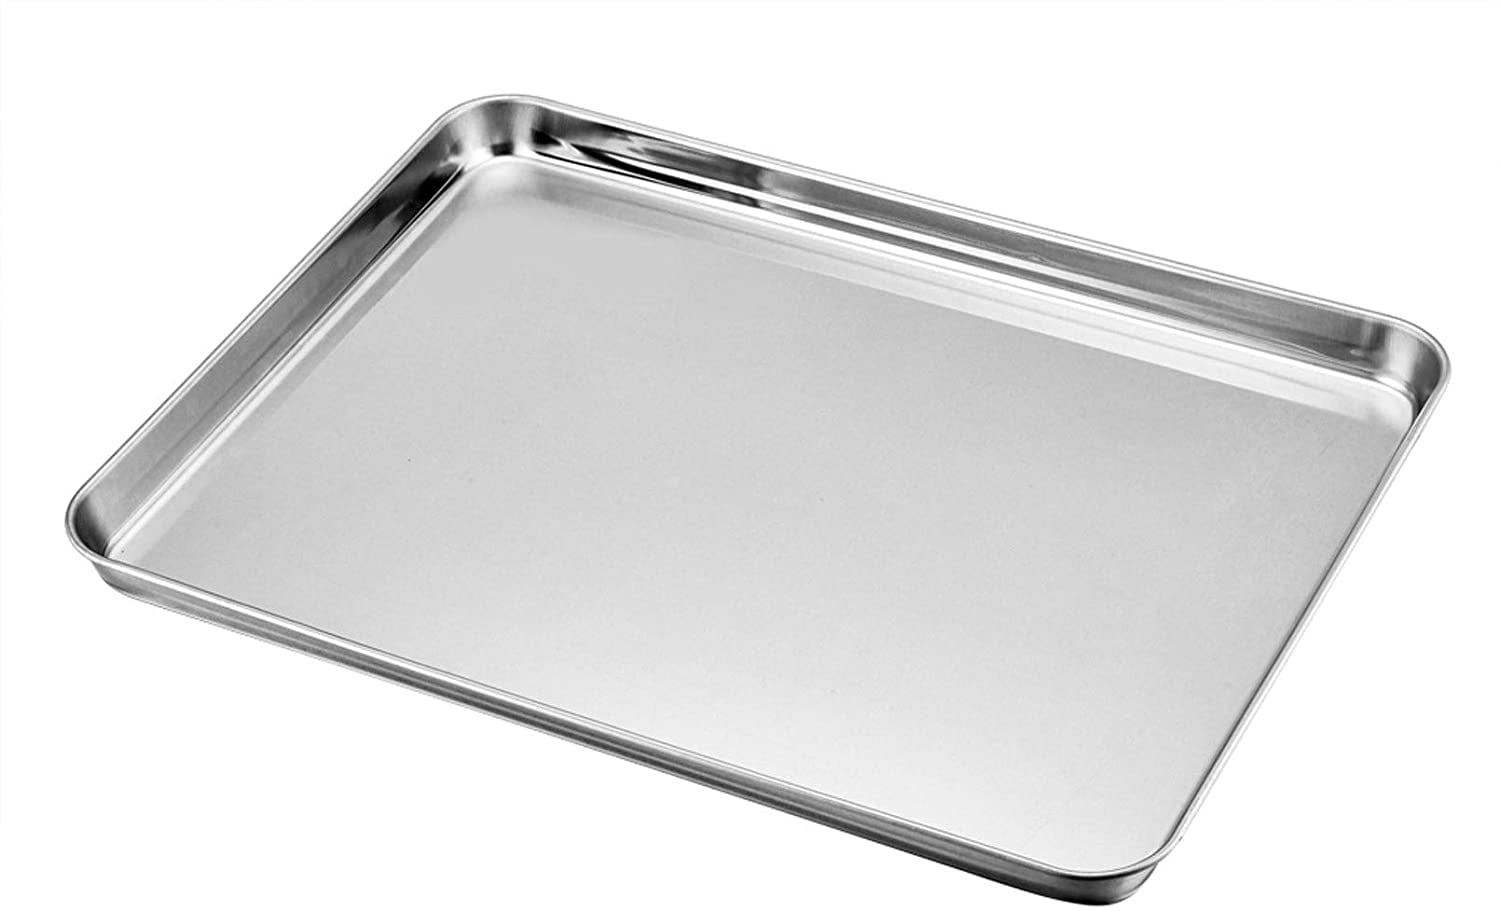 12x10x1 inch 3 Piece/set Stainless Steel Baking Pan Large Cookie Sheet Set  for